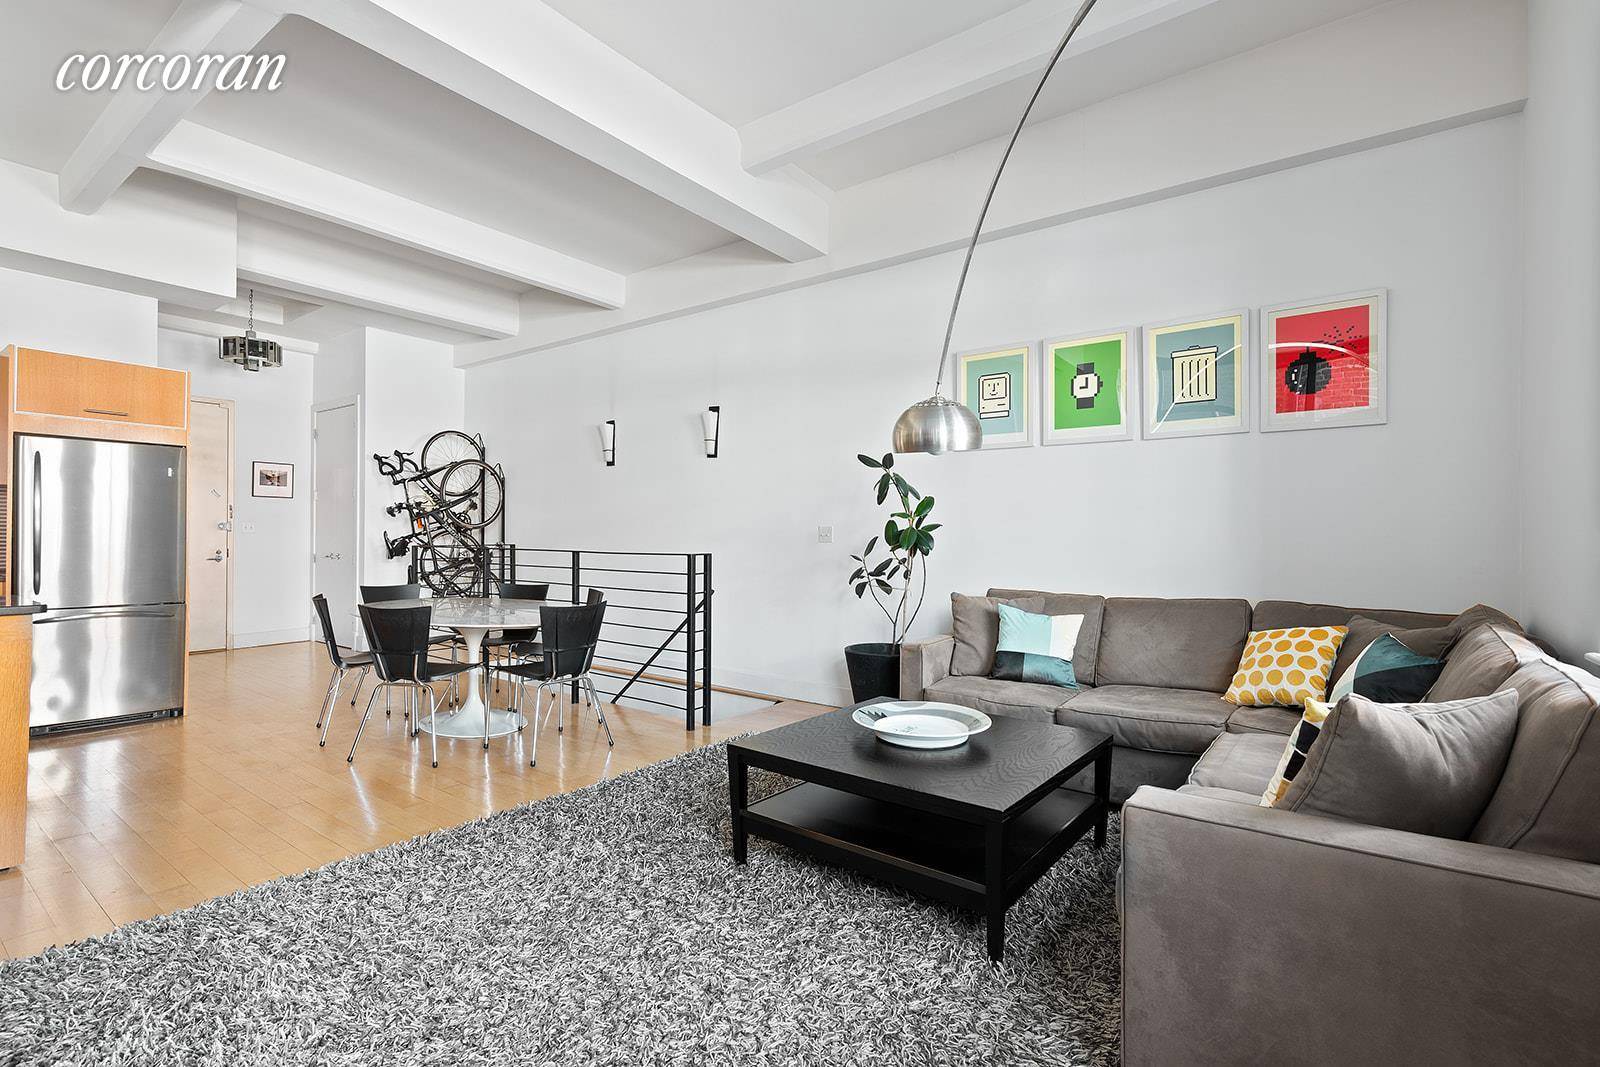 Accepted Offer ! The only 2 Bed 2 Bath Condo Loft in Williamsburg Prime, under 800 per square foot !